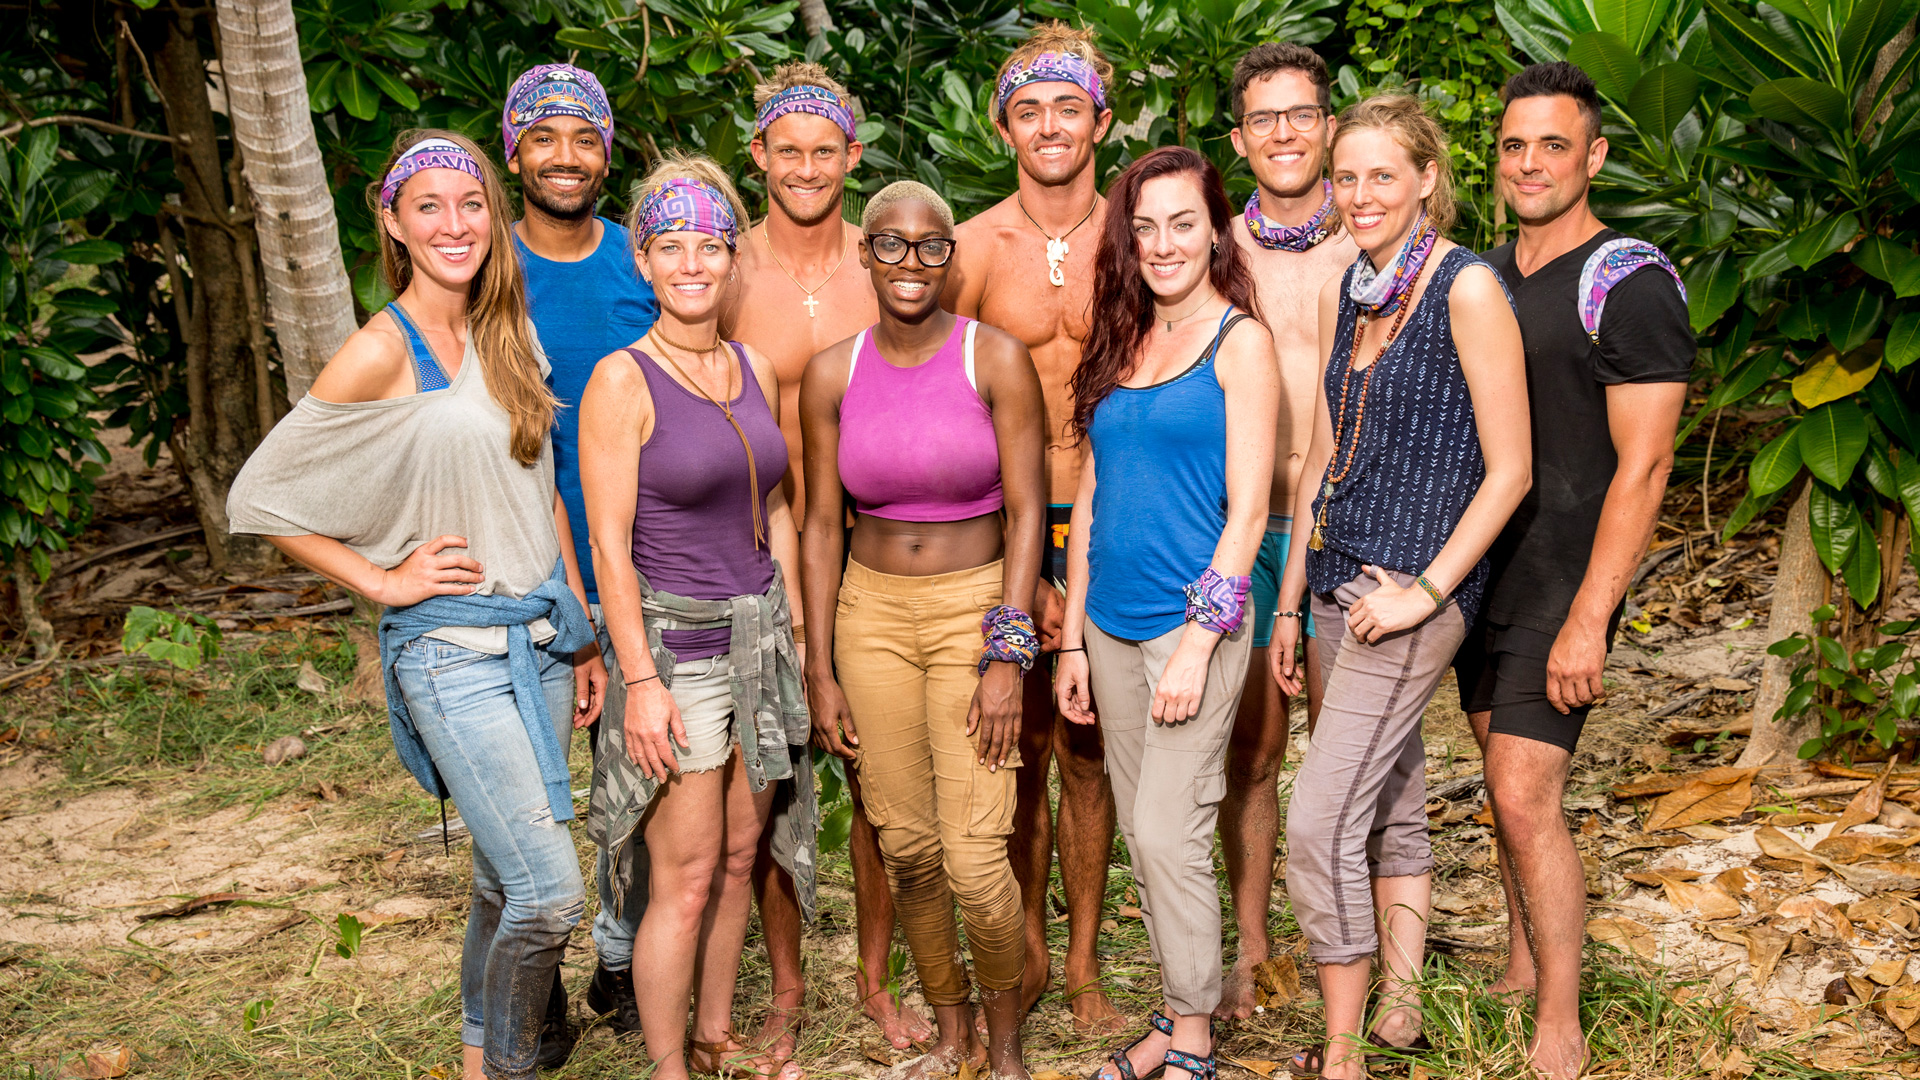 Survivor Season 36 Meet The Cast Of Ghost Island Survivor Photos Cbs Com This page provides information about current and upcoming season. survivor season 36 meet the cast of ghost island survivor photos cbs com